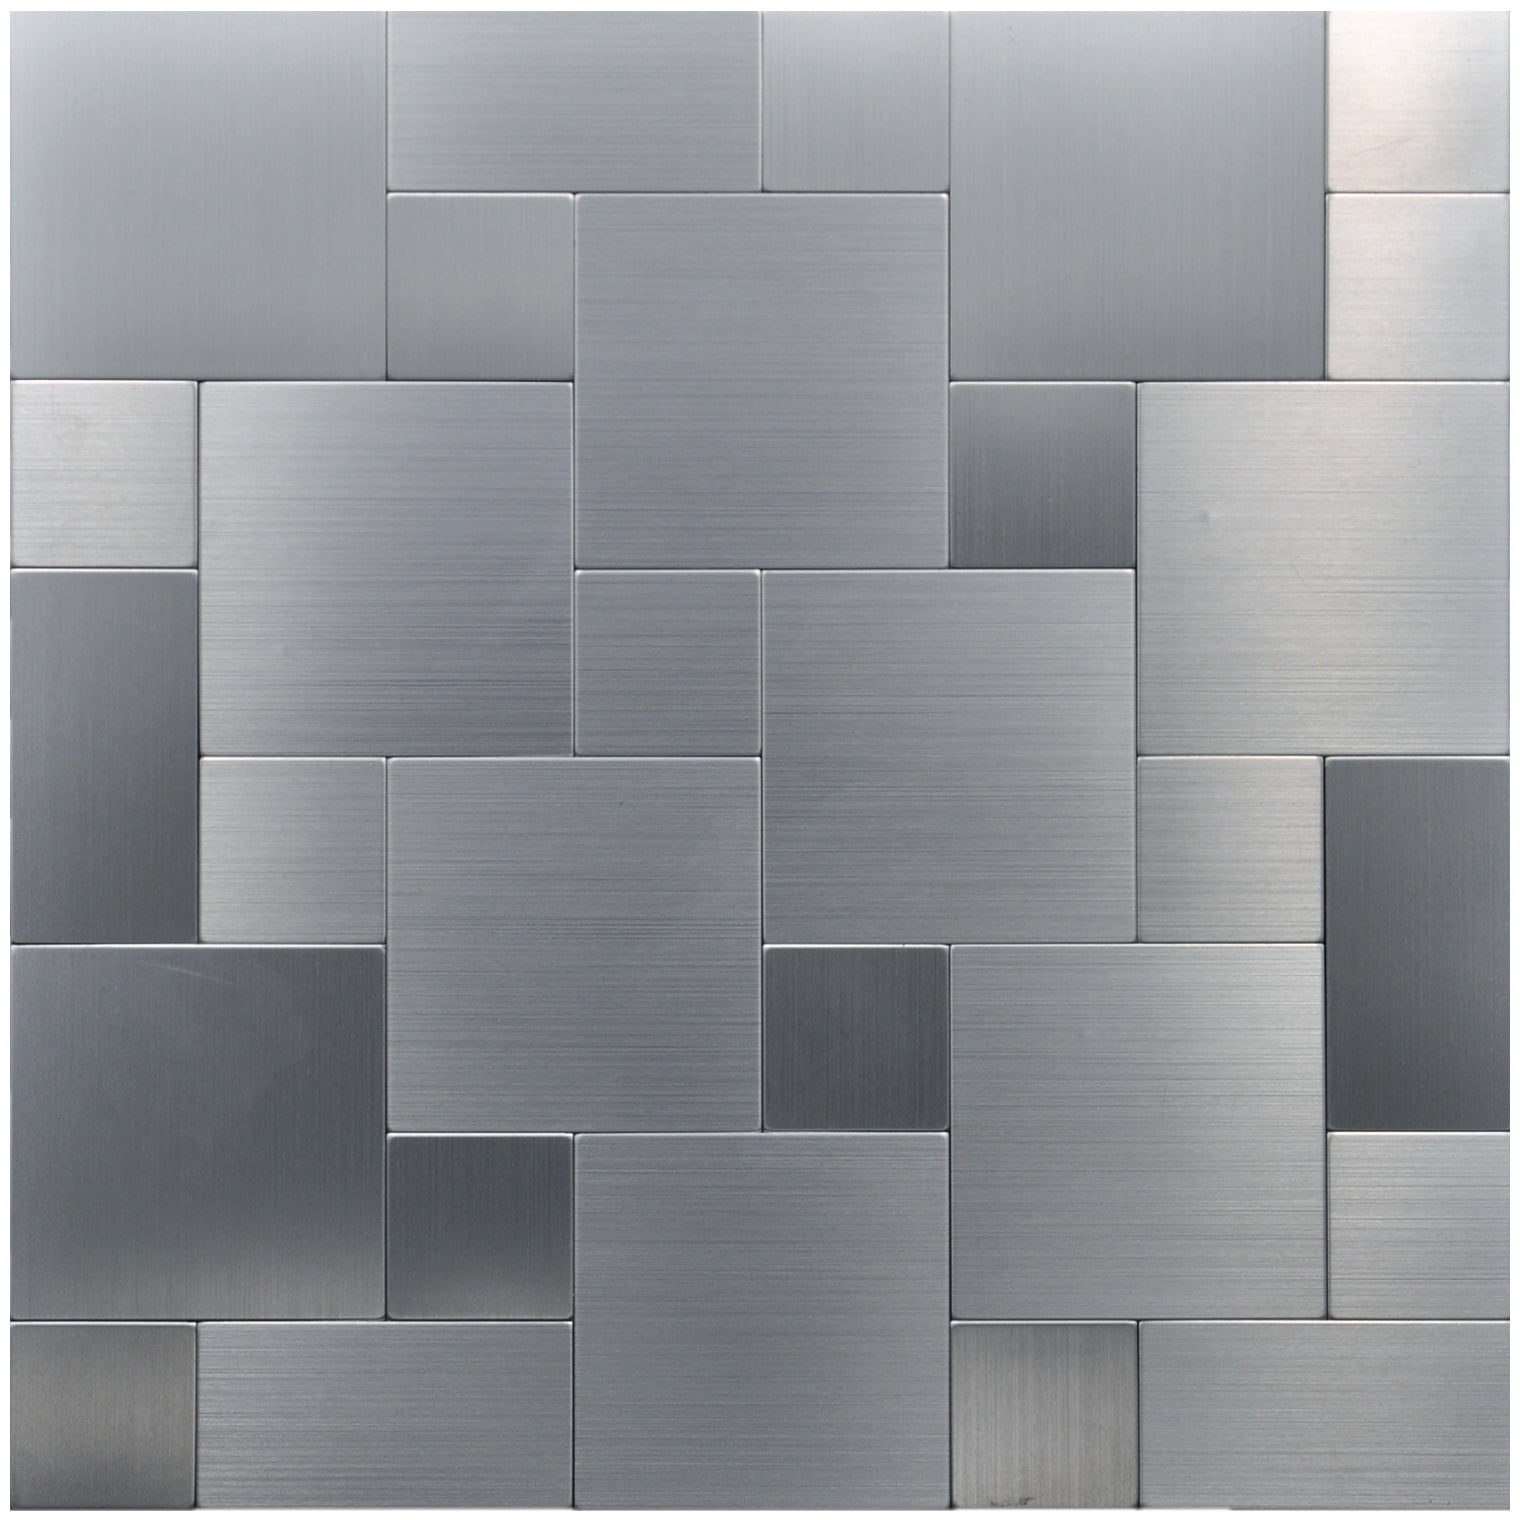 Art3d Black 12 in. x 12 in. Metal Peel and Stick Tile Backsplash for Kitchen Wall, Windmill Puzzle Glass Mixed (9.6sq.ft./Box)